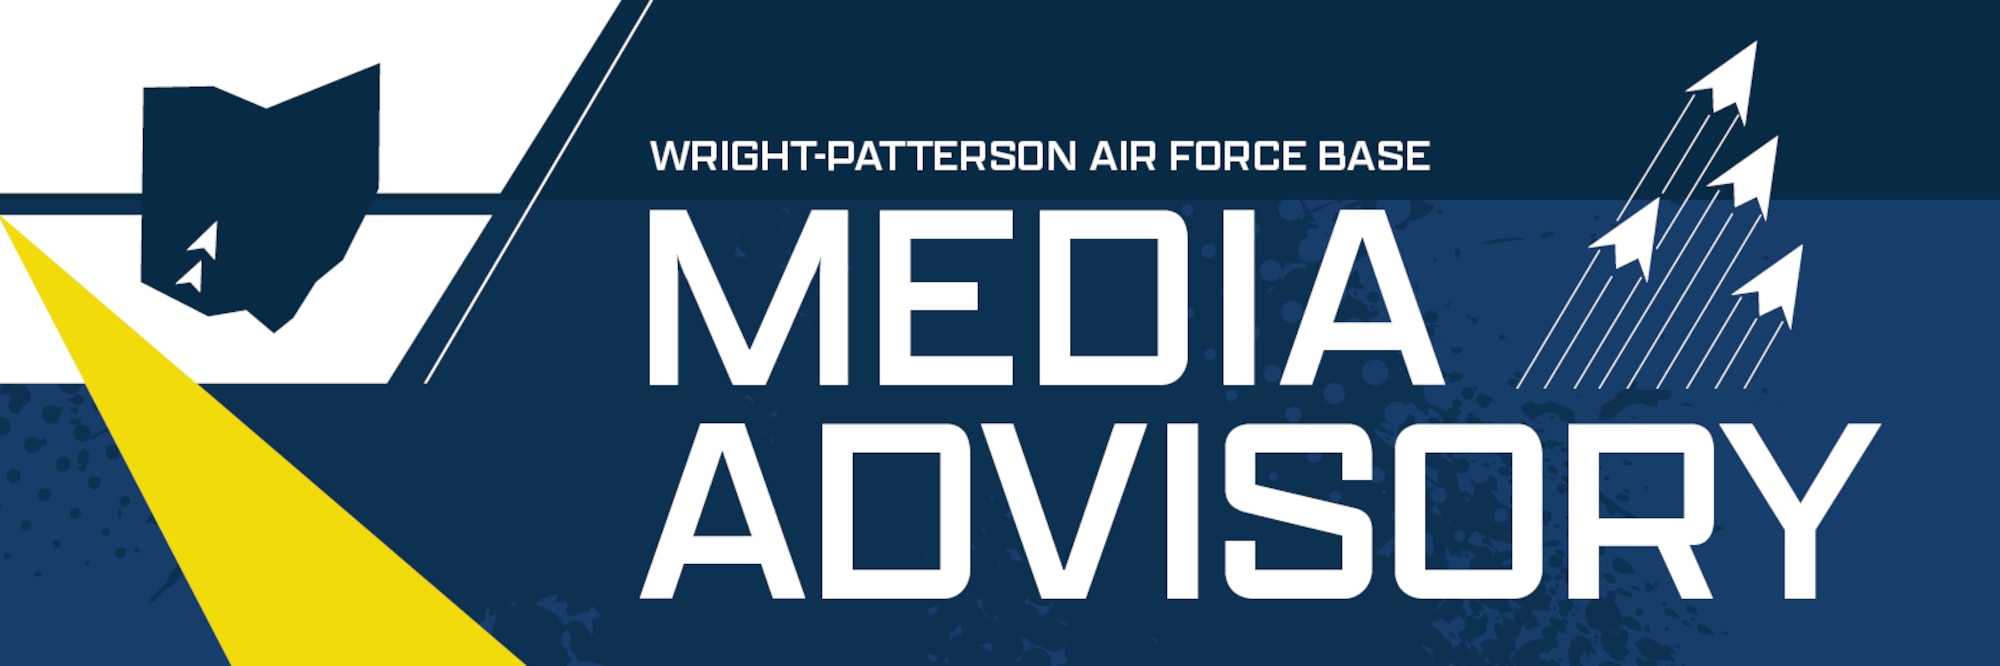 Wright-Patterson AFB Media Advisory graphic